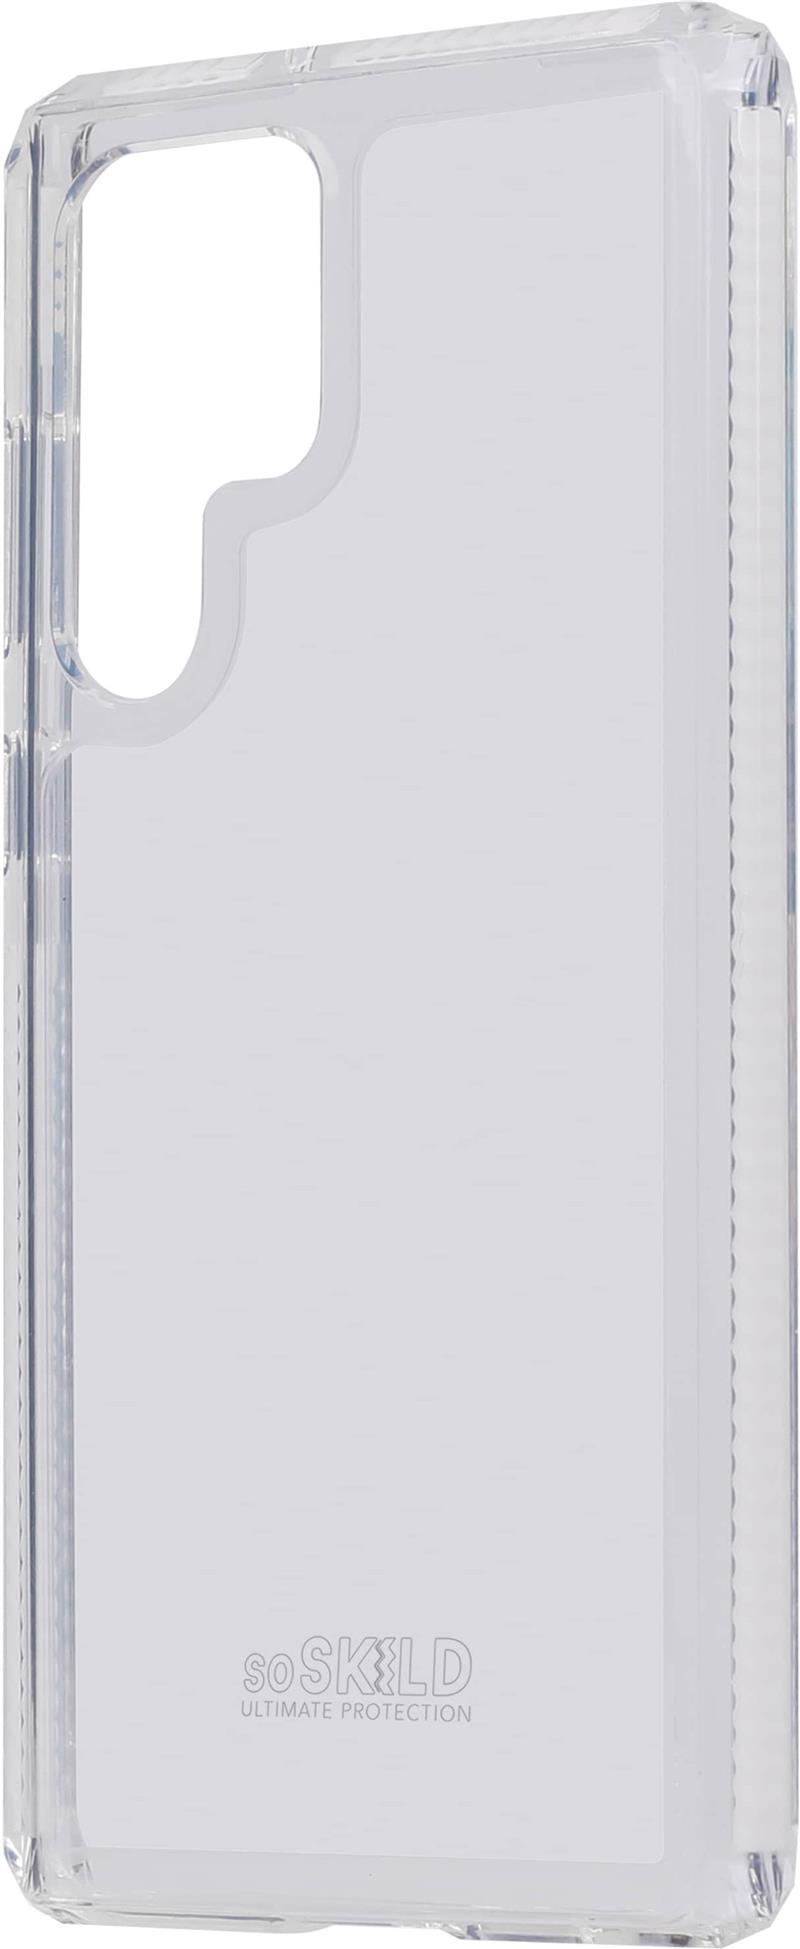 SoSkild Samsung Galaxy S22 Ultra Defend Heavy Impact Case - Clear